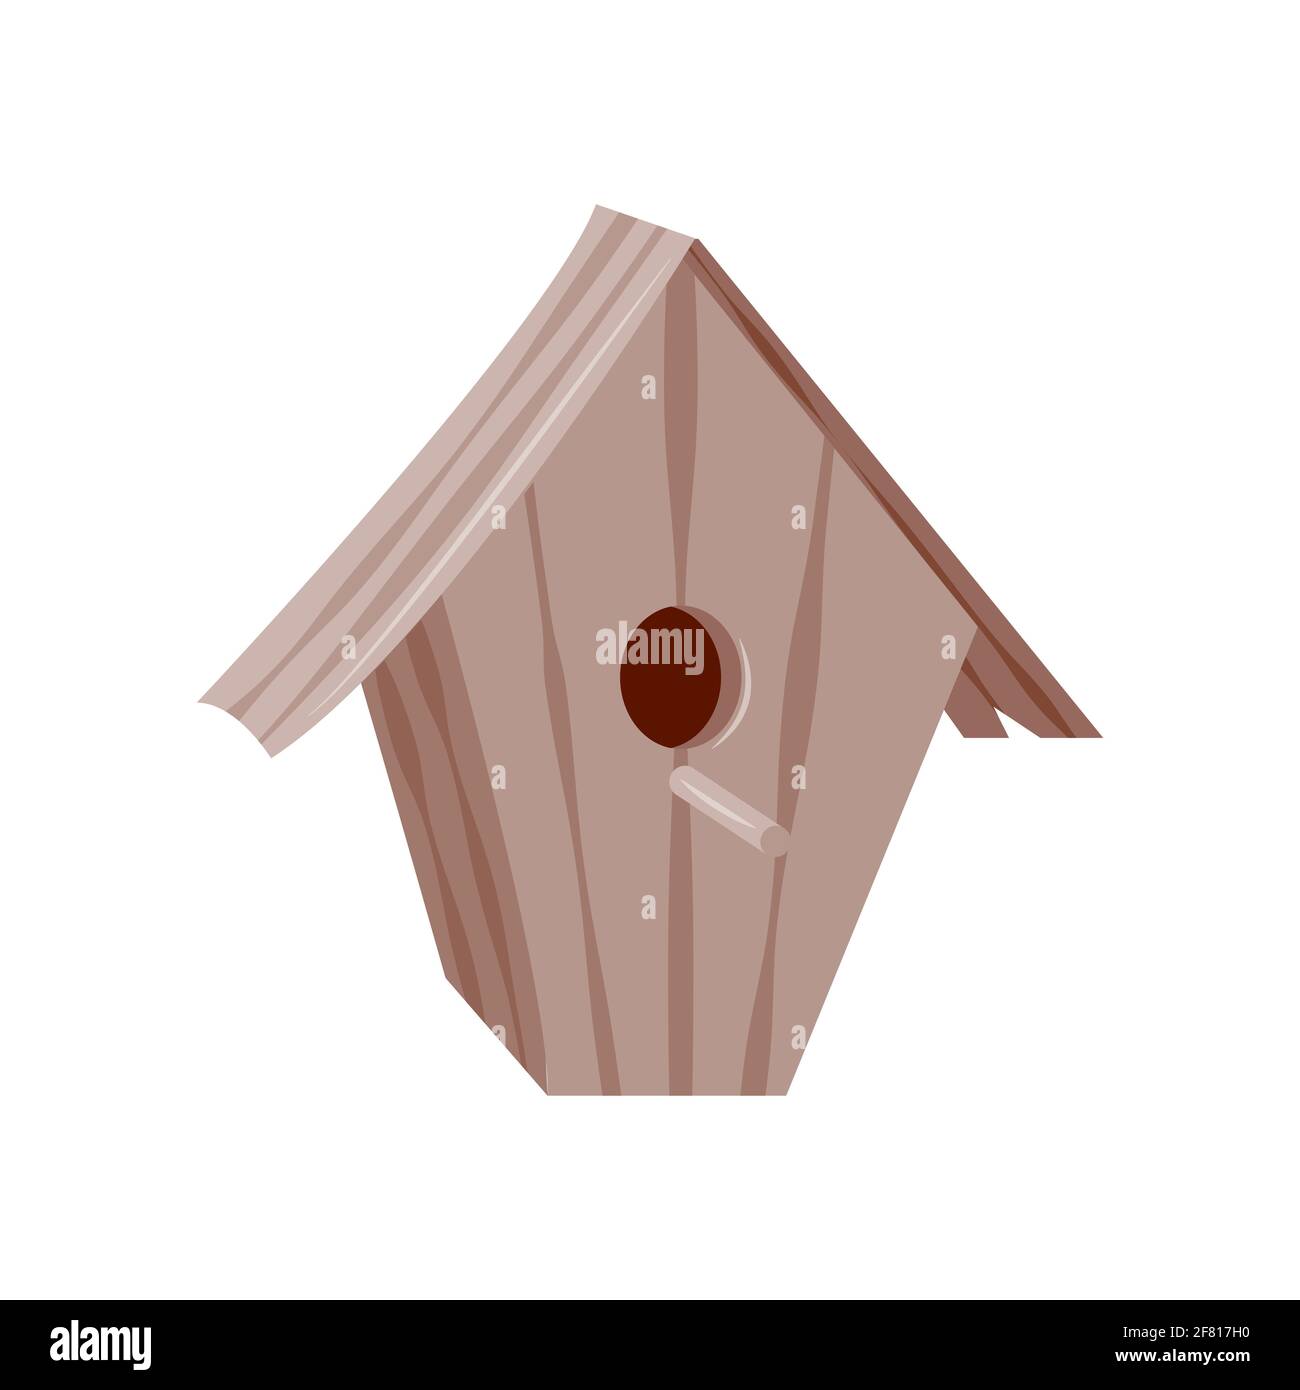 Brown wooden birdhouse illustration isolated on white background Stock Vector